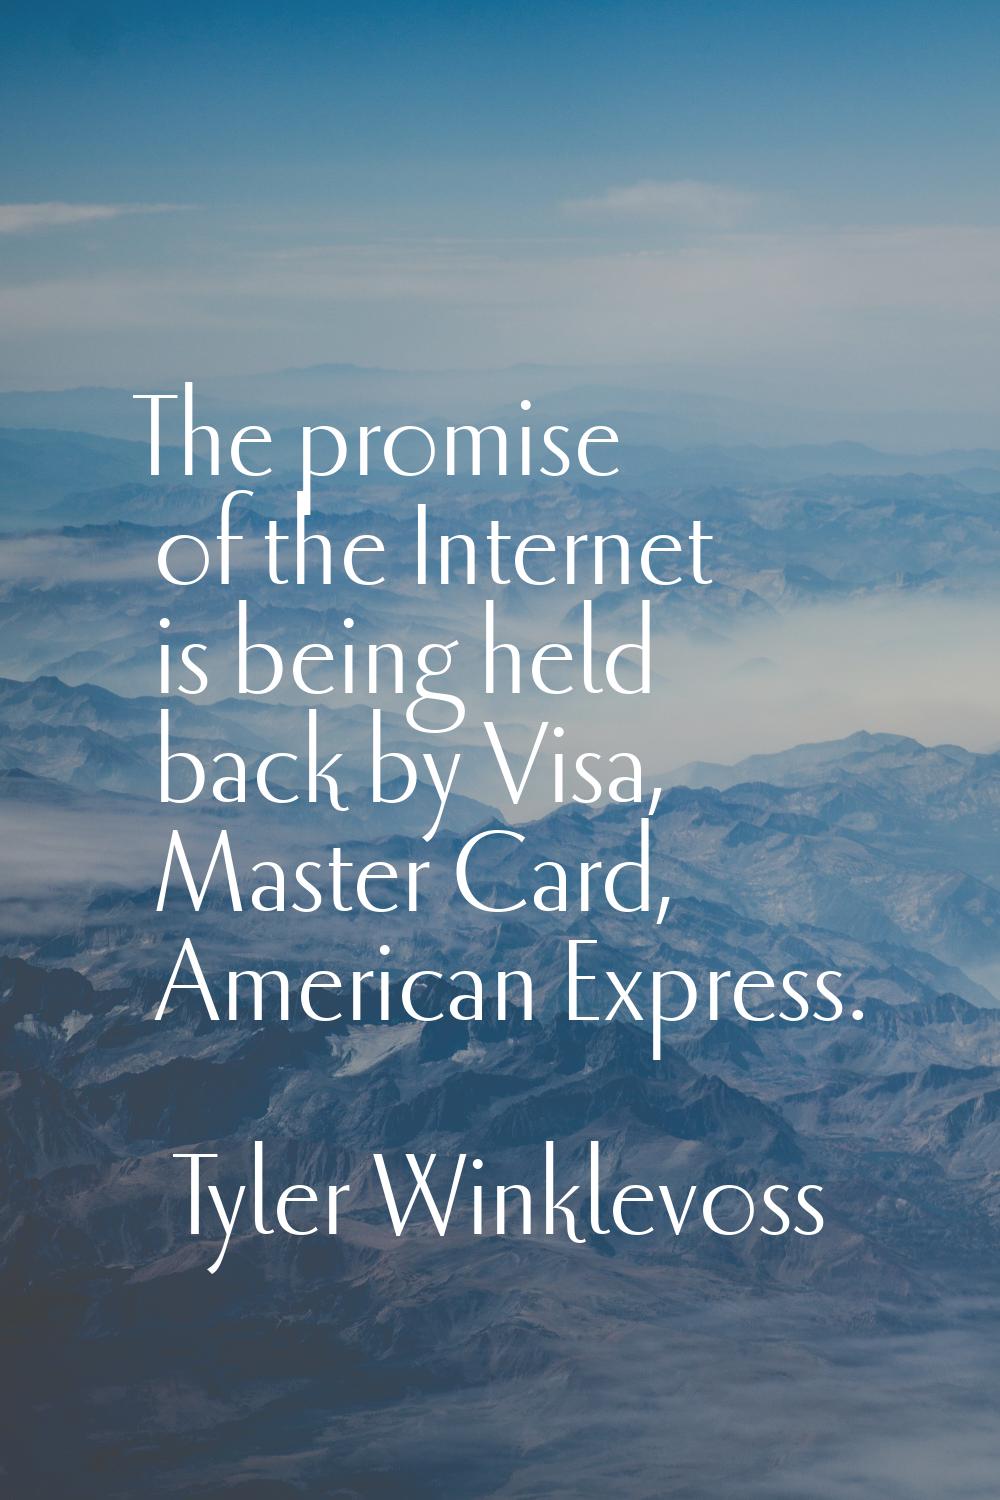 The promise of the Internet is being held back by Visa, Master Card, American Express.